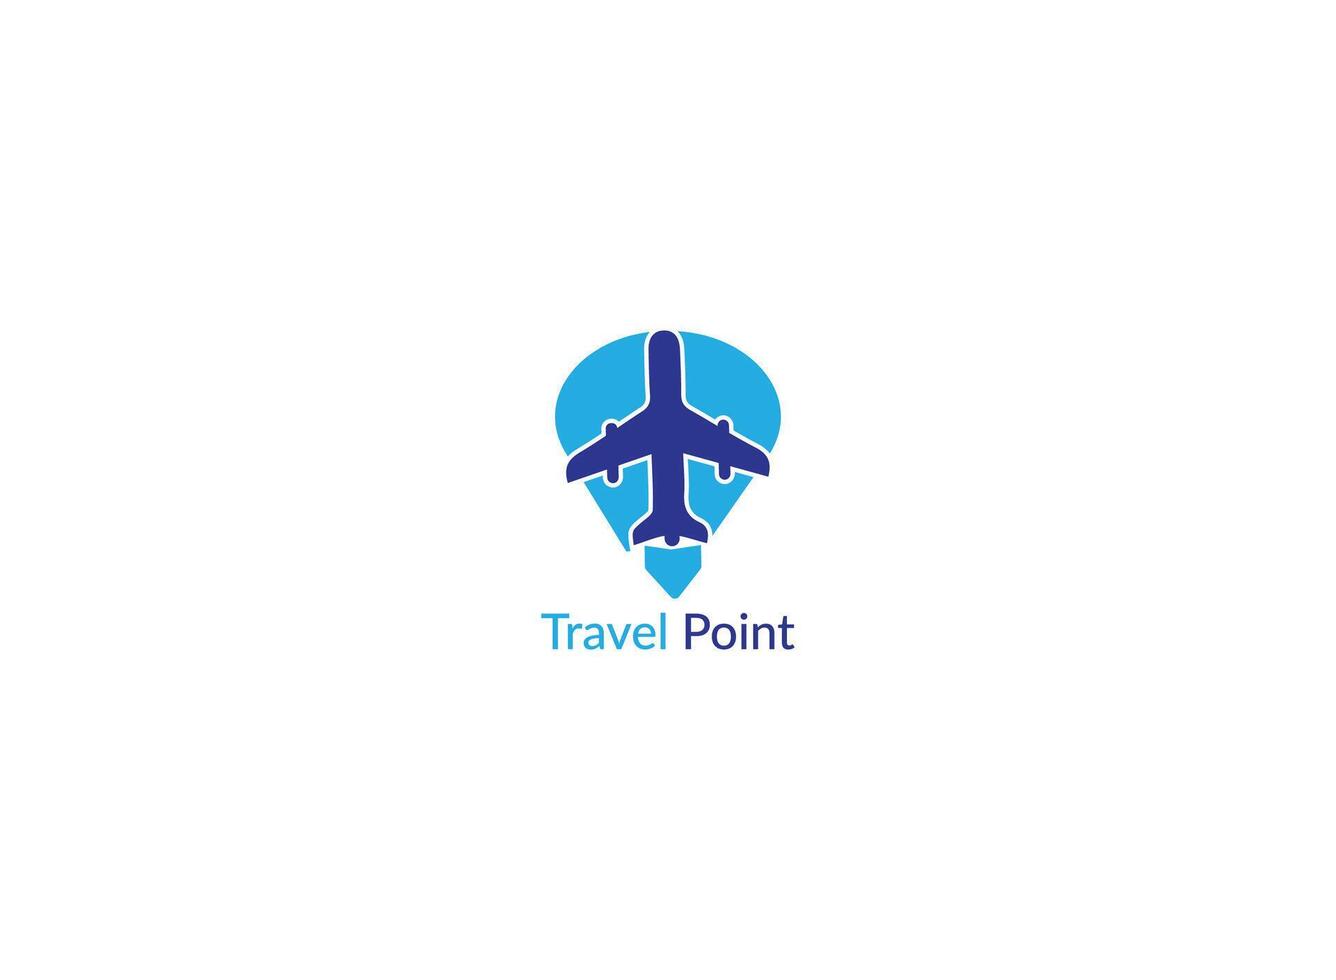 Vector logo design templates for map point with  airlines, airplane tickets, travel agencies - planes and emblems